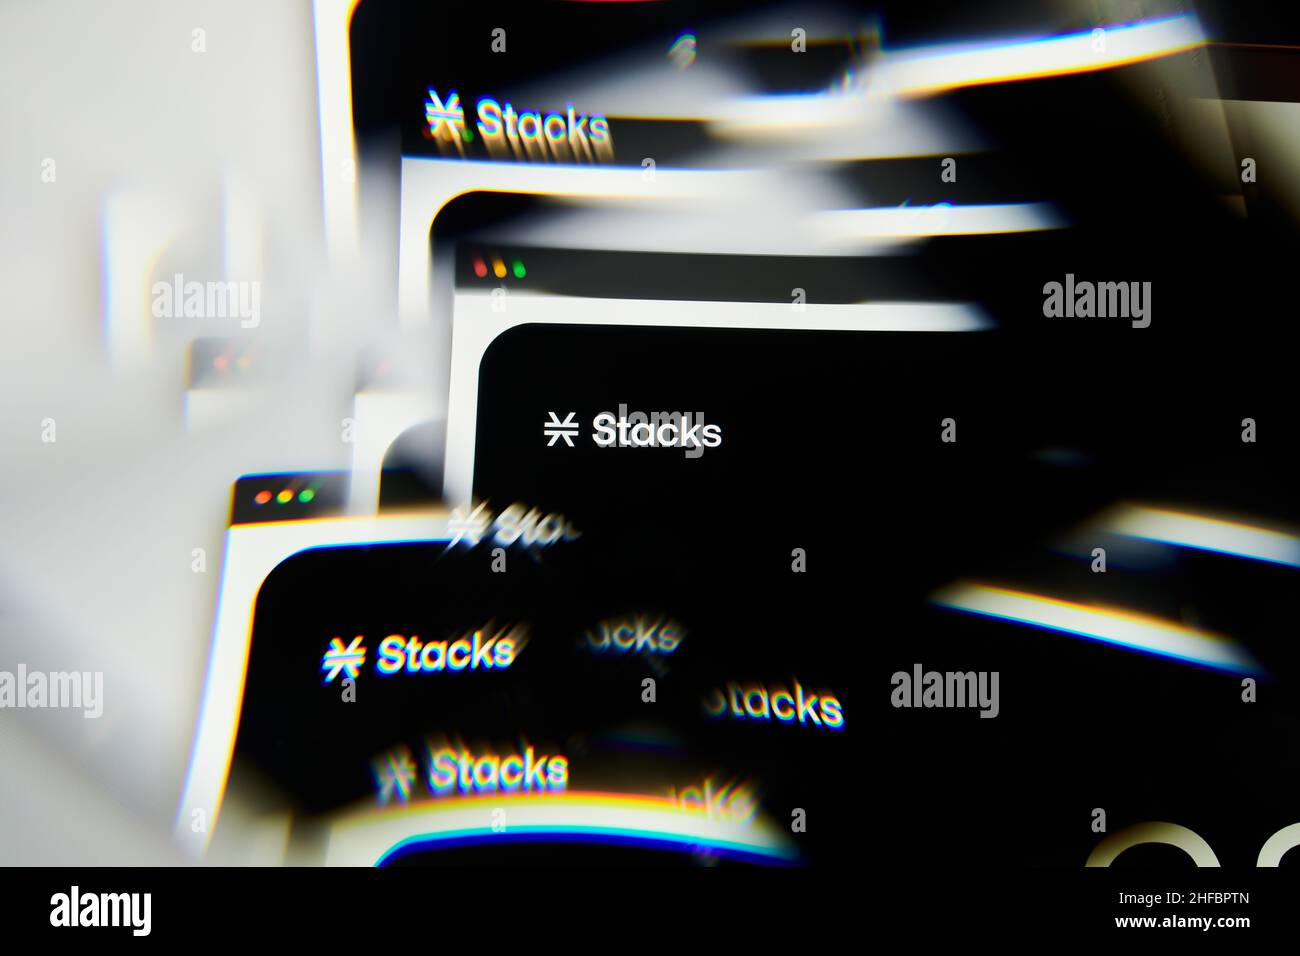 Milan, Italy - January 11, 2022: stacks - STX logo on laptop screen seen through an optical prism. Dynamic and unique image form stacks, STX coin webs Stock Photo